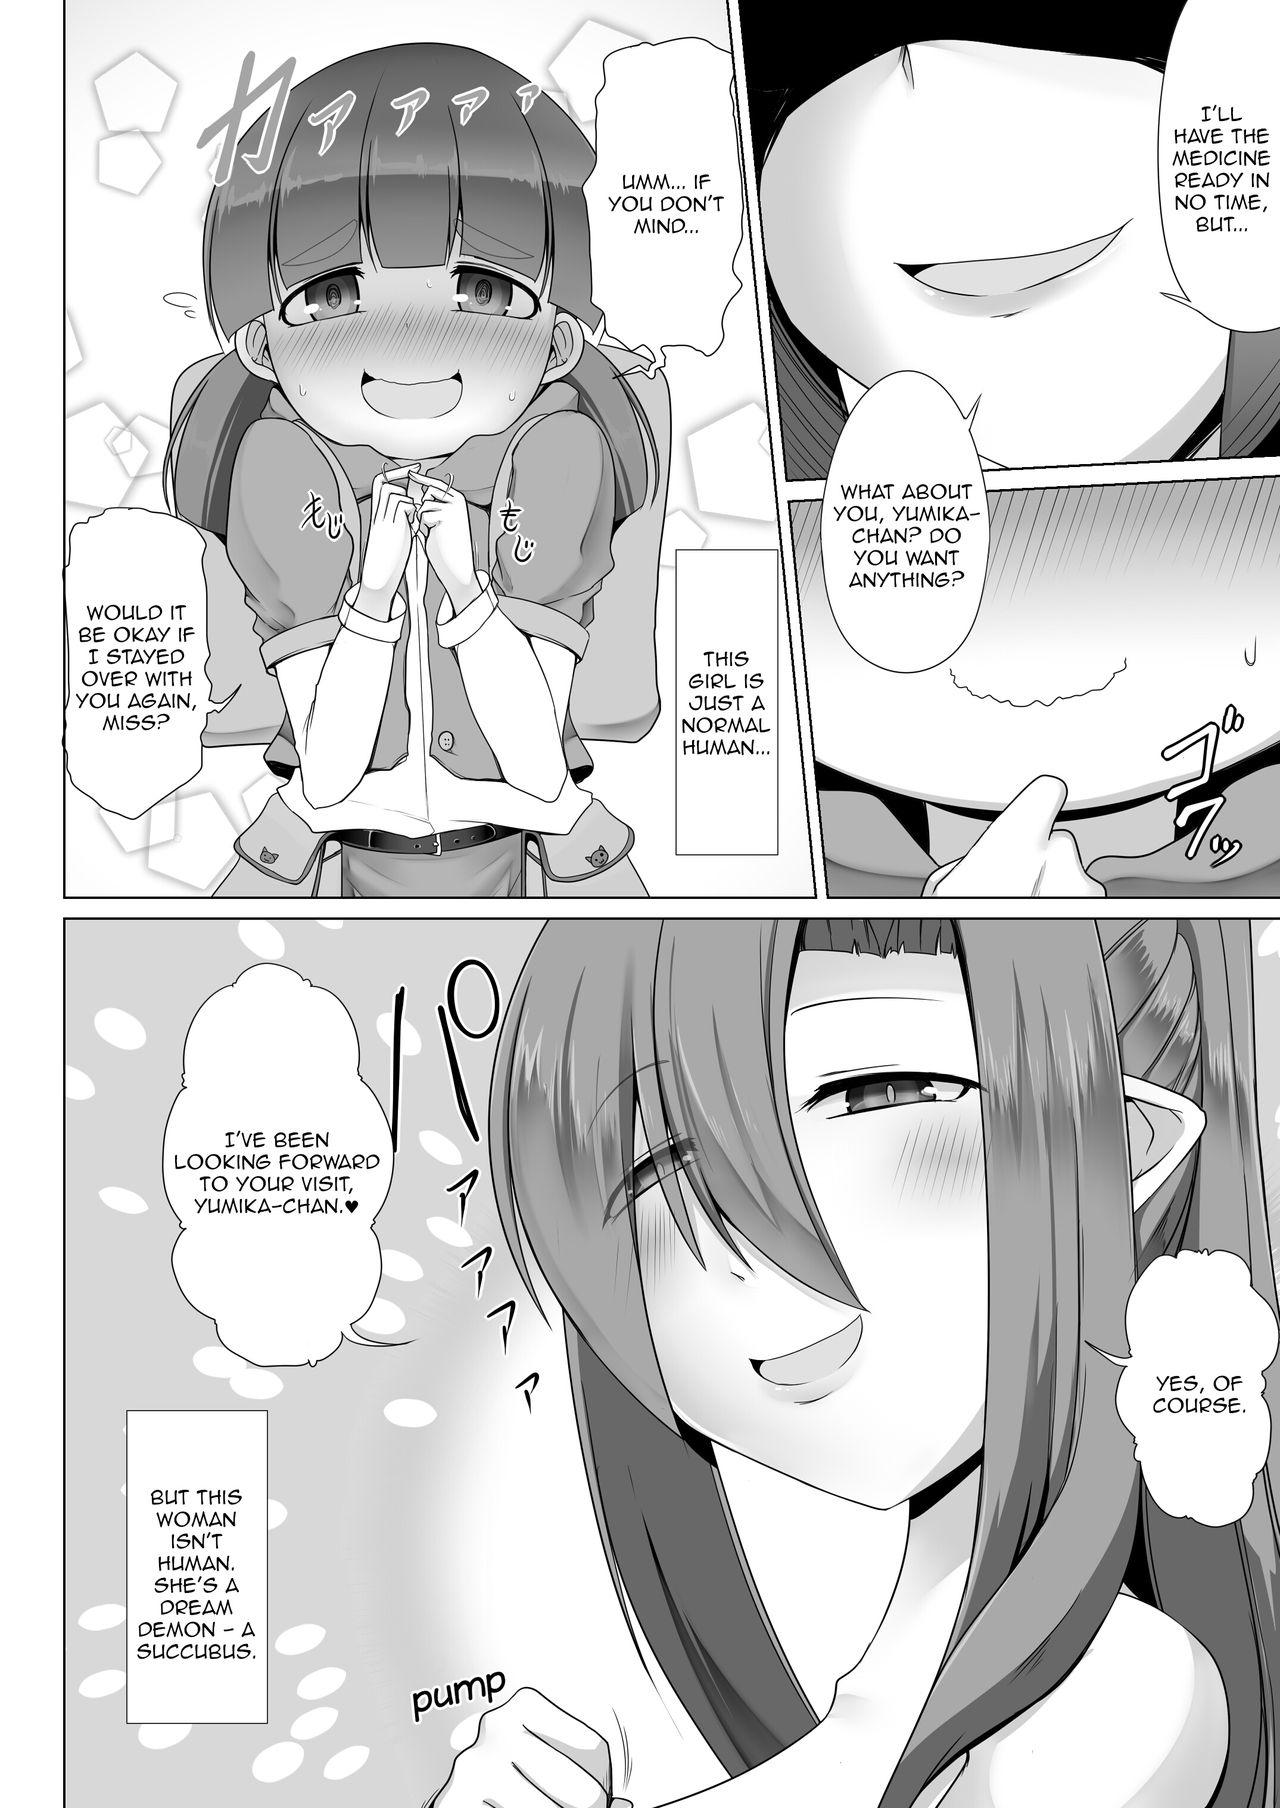 Pussy Play Lolicon Les Succubus wa Midara na Slow Life o Mankitsu Suru | The Leisurely Lewd Life of a Lesbian Lolicon Succubus Gay Blondhair - Page 4